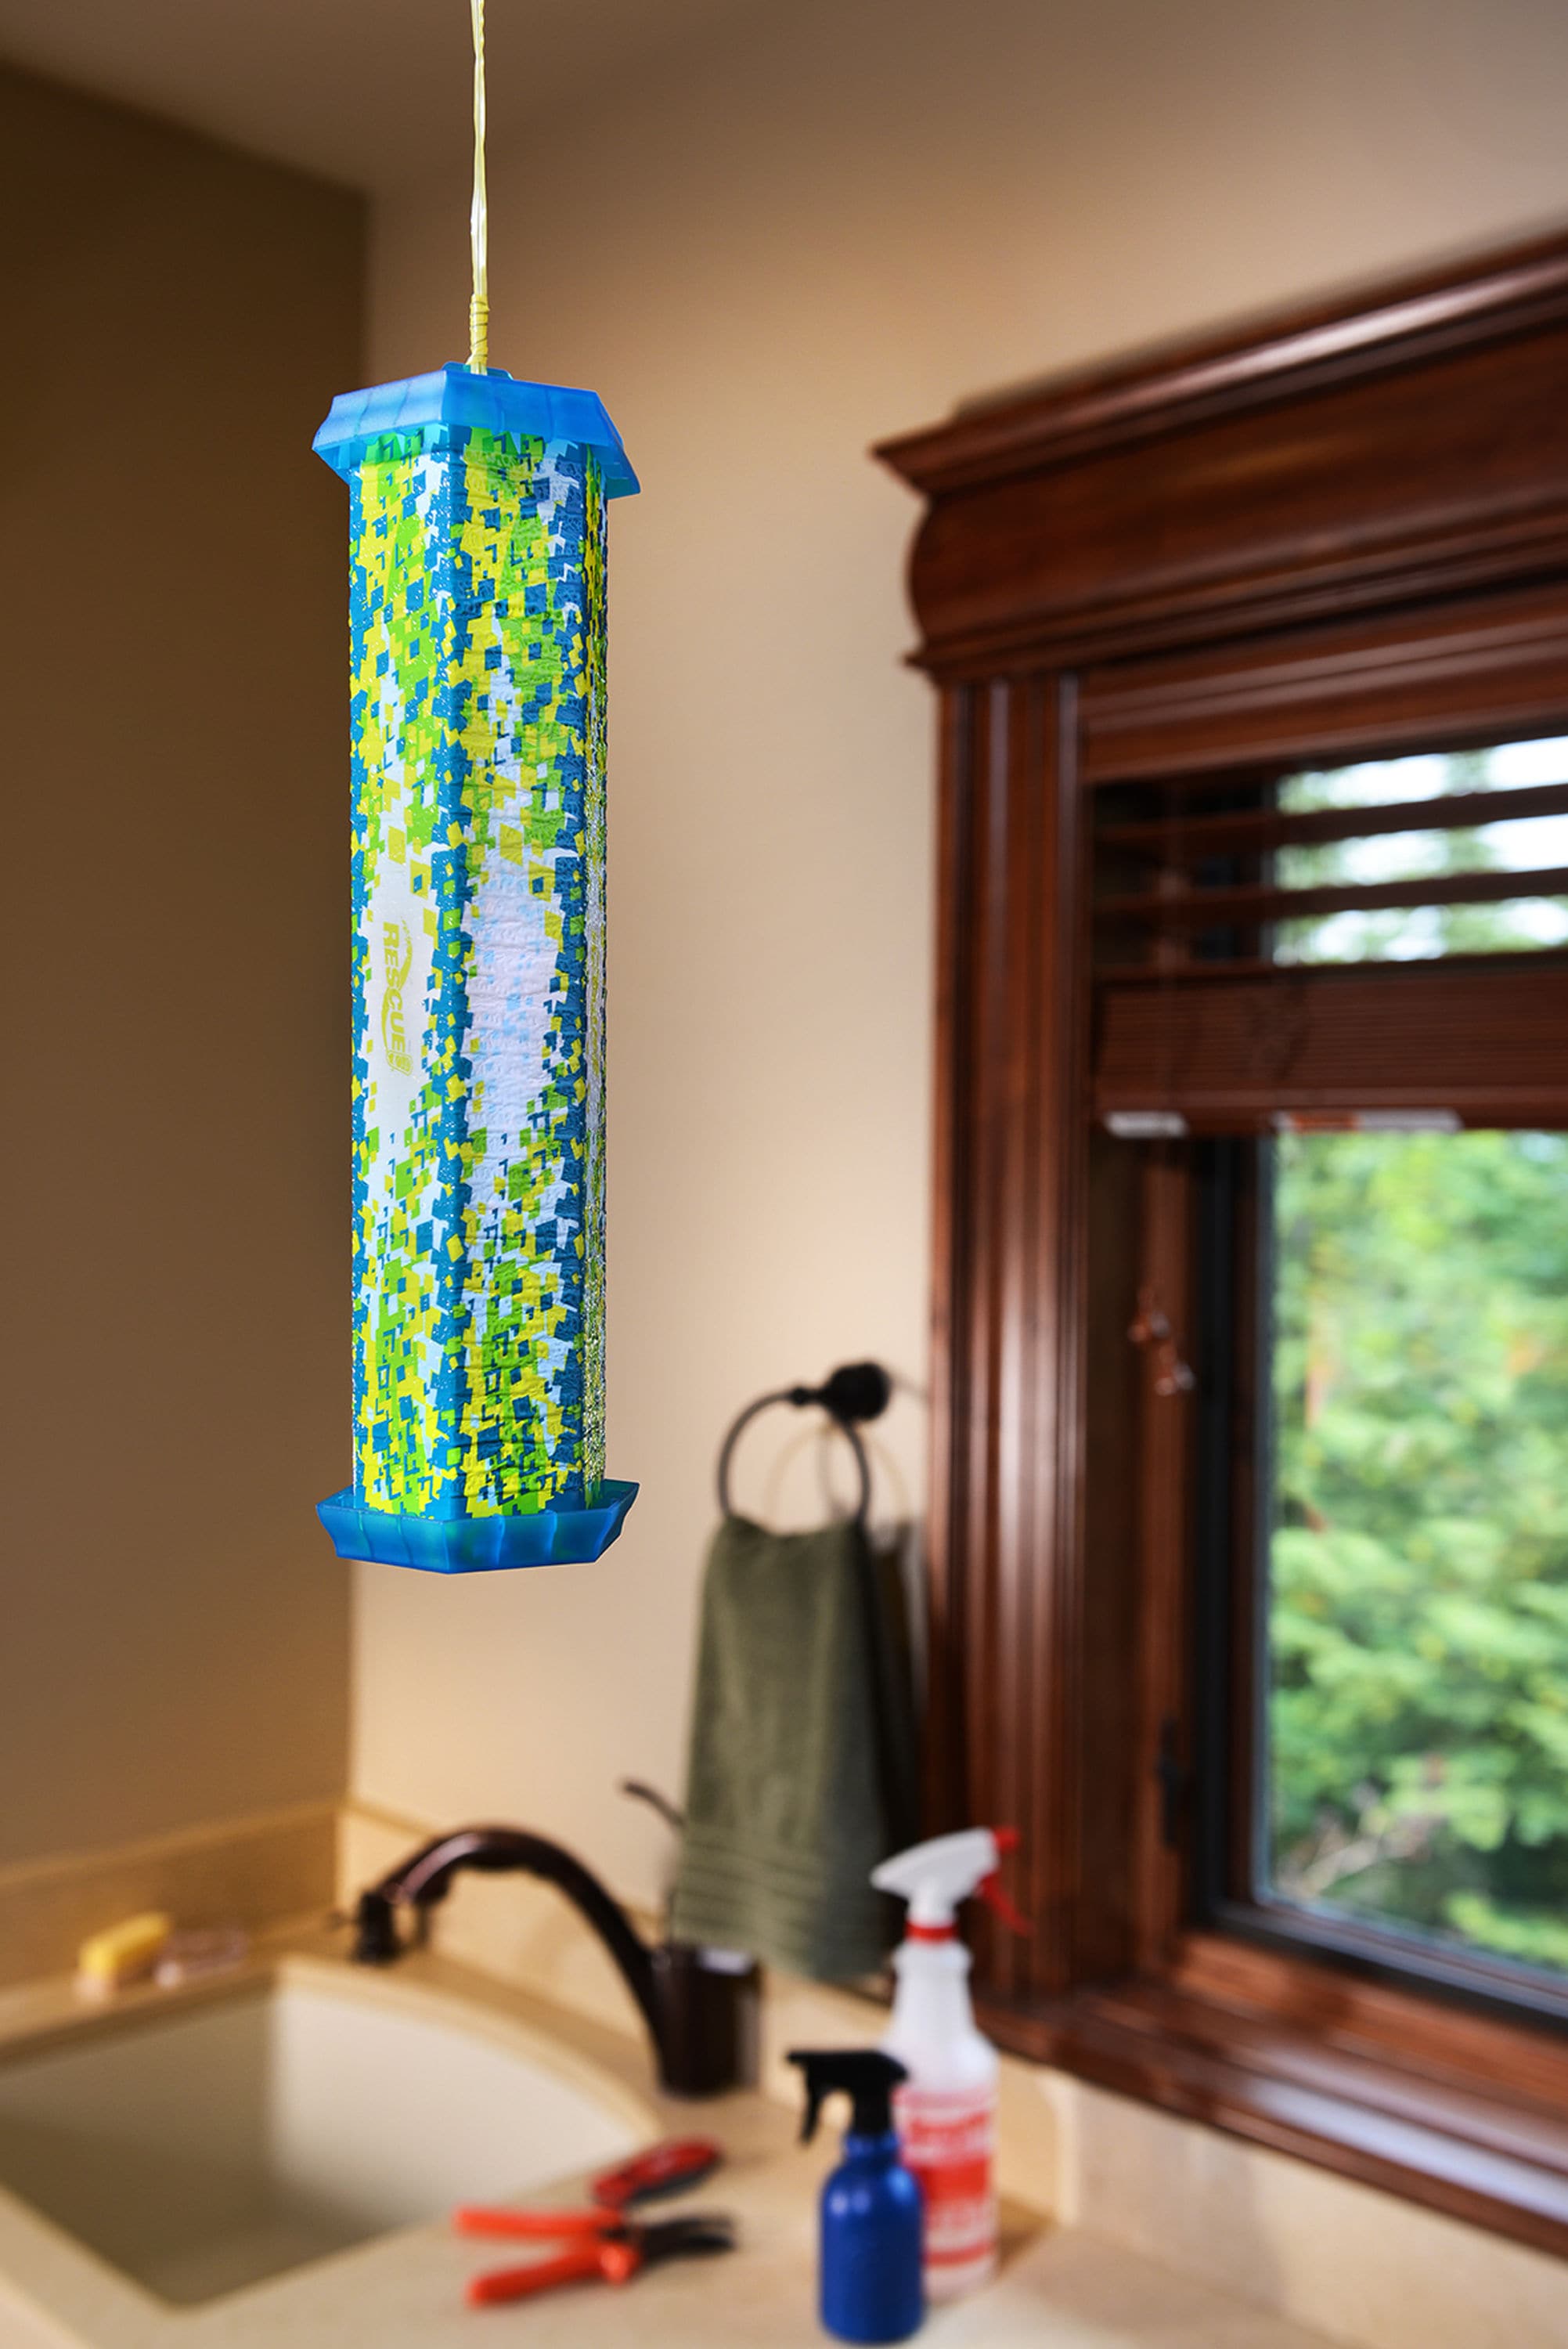 Rescue TrapStik for Flies Indoor Hanging Fly Trap